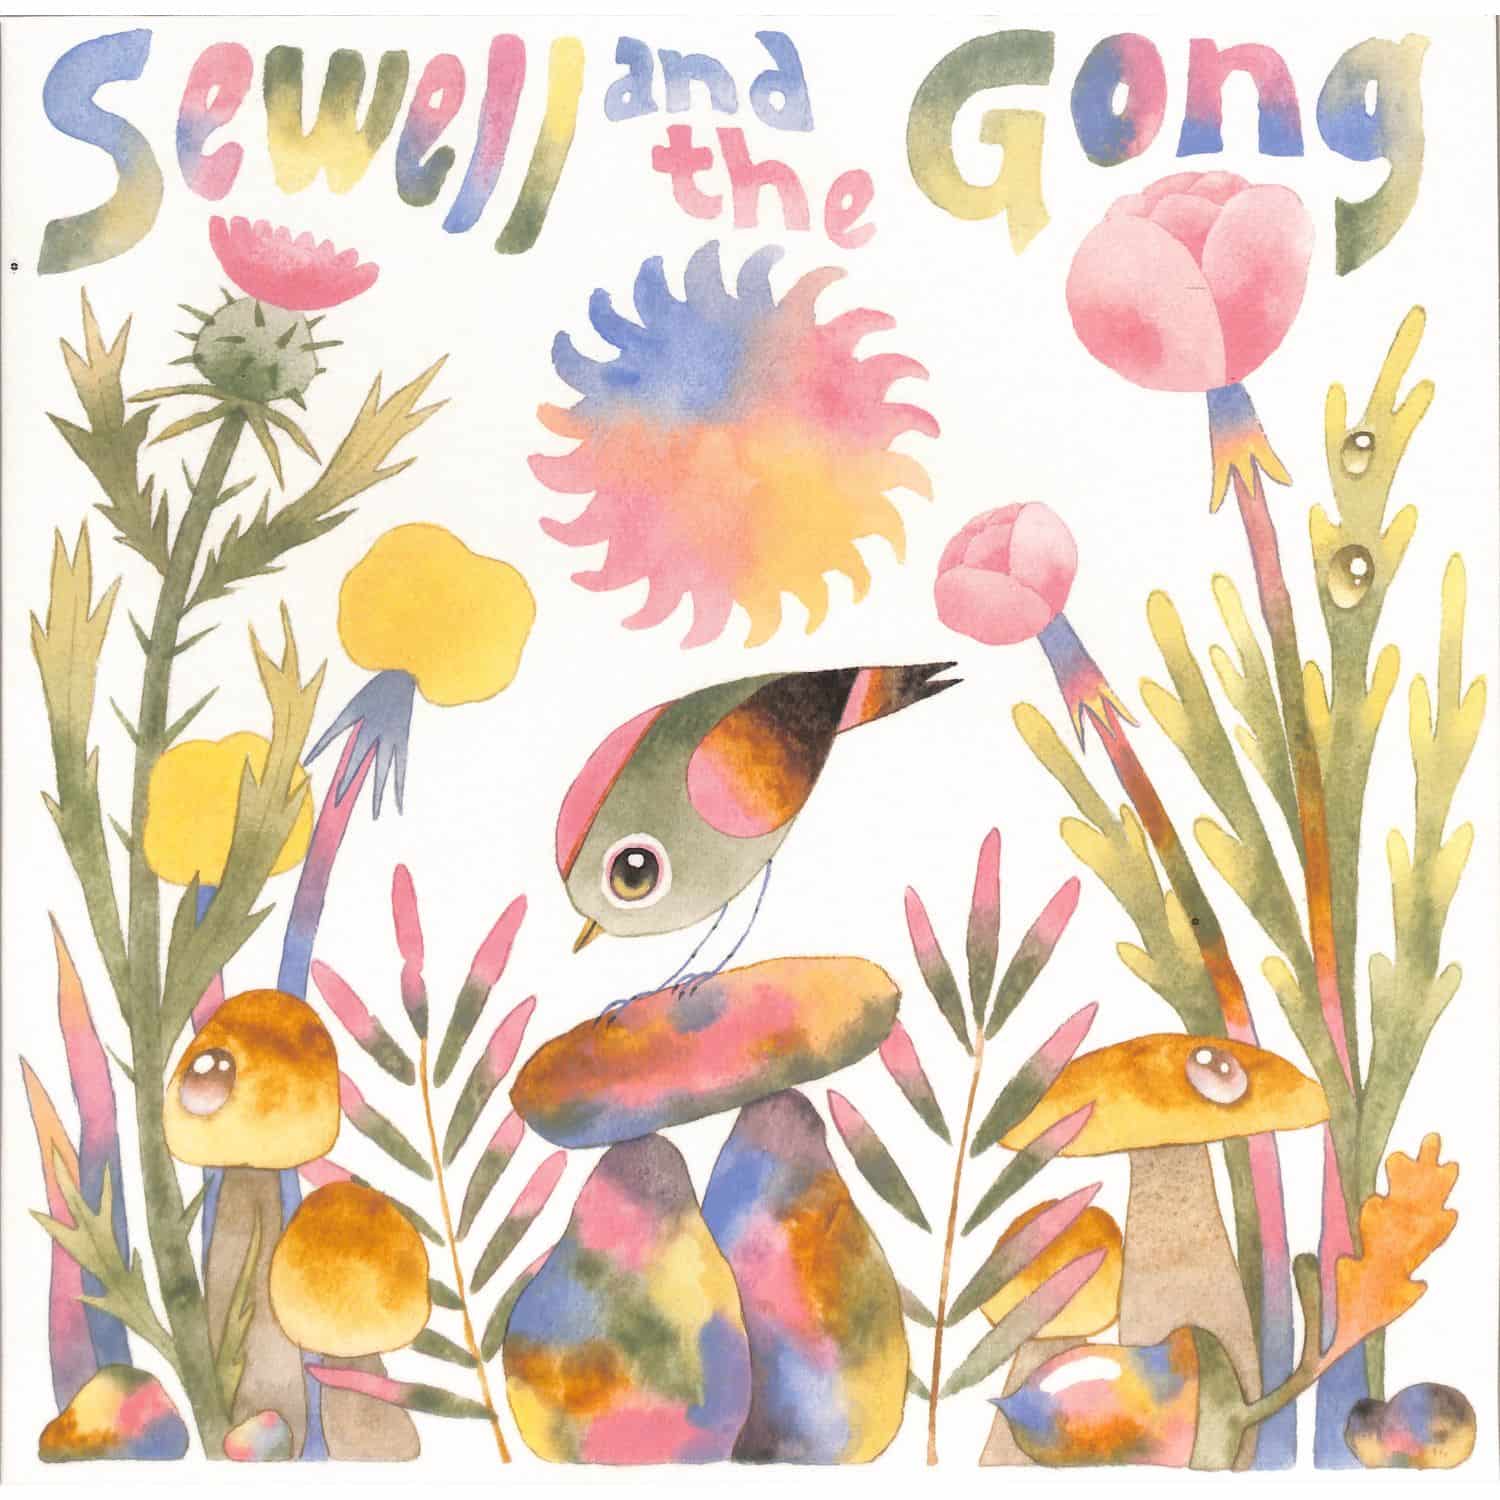 Sewell & The Gong - TONIGHT WE FLY